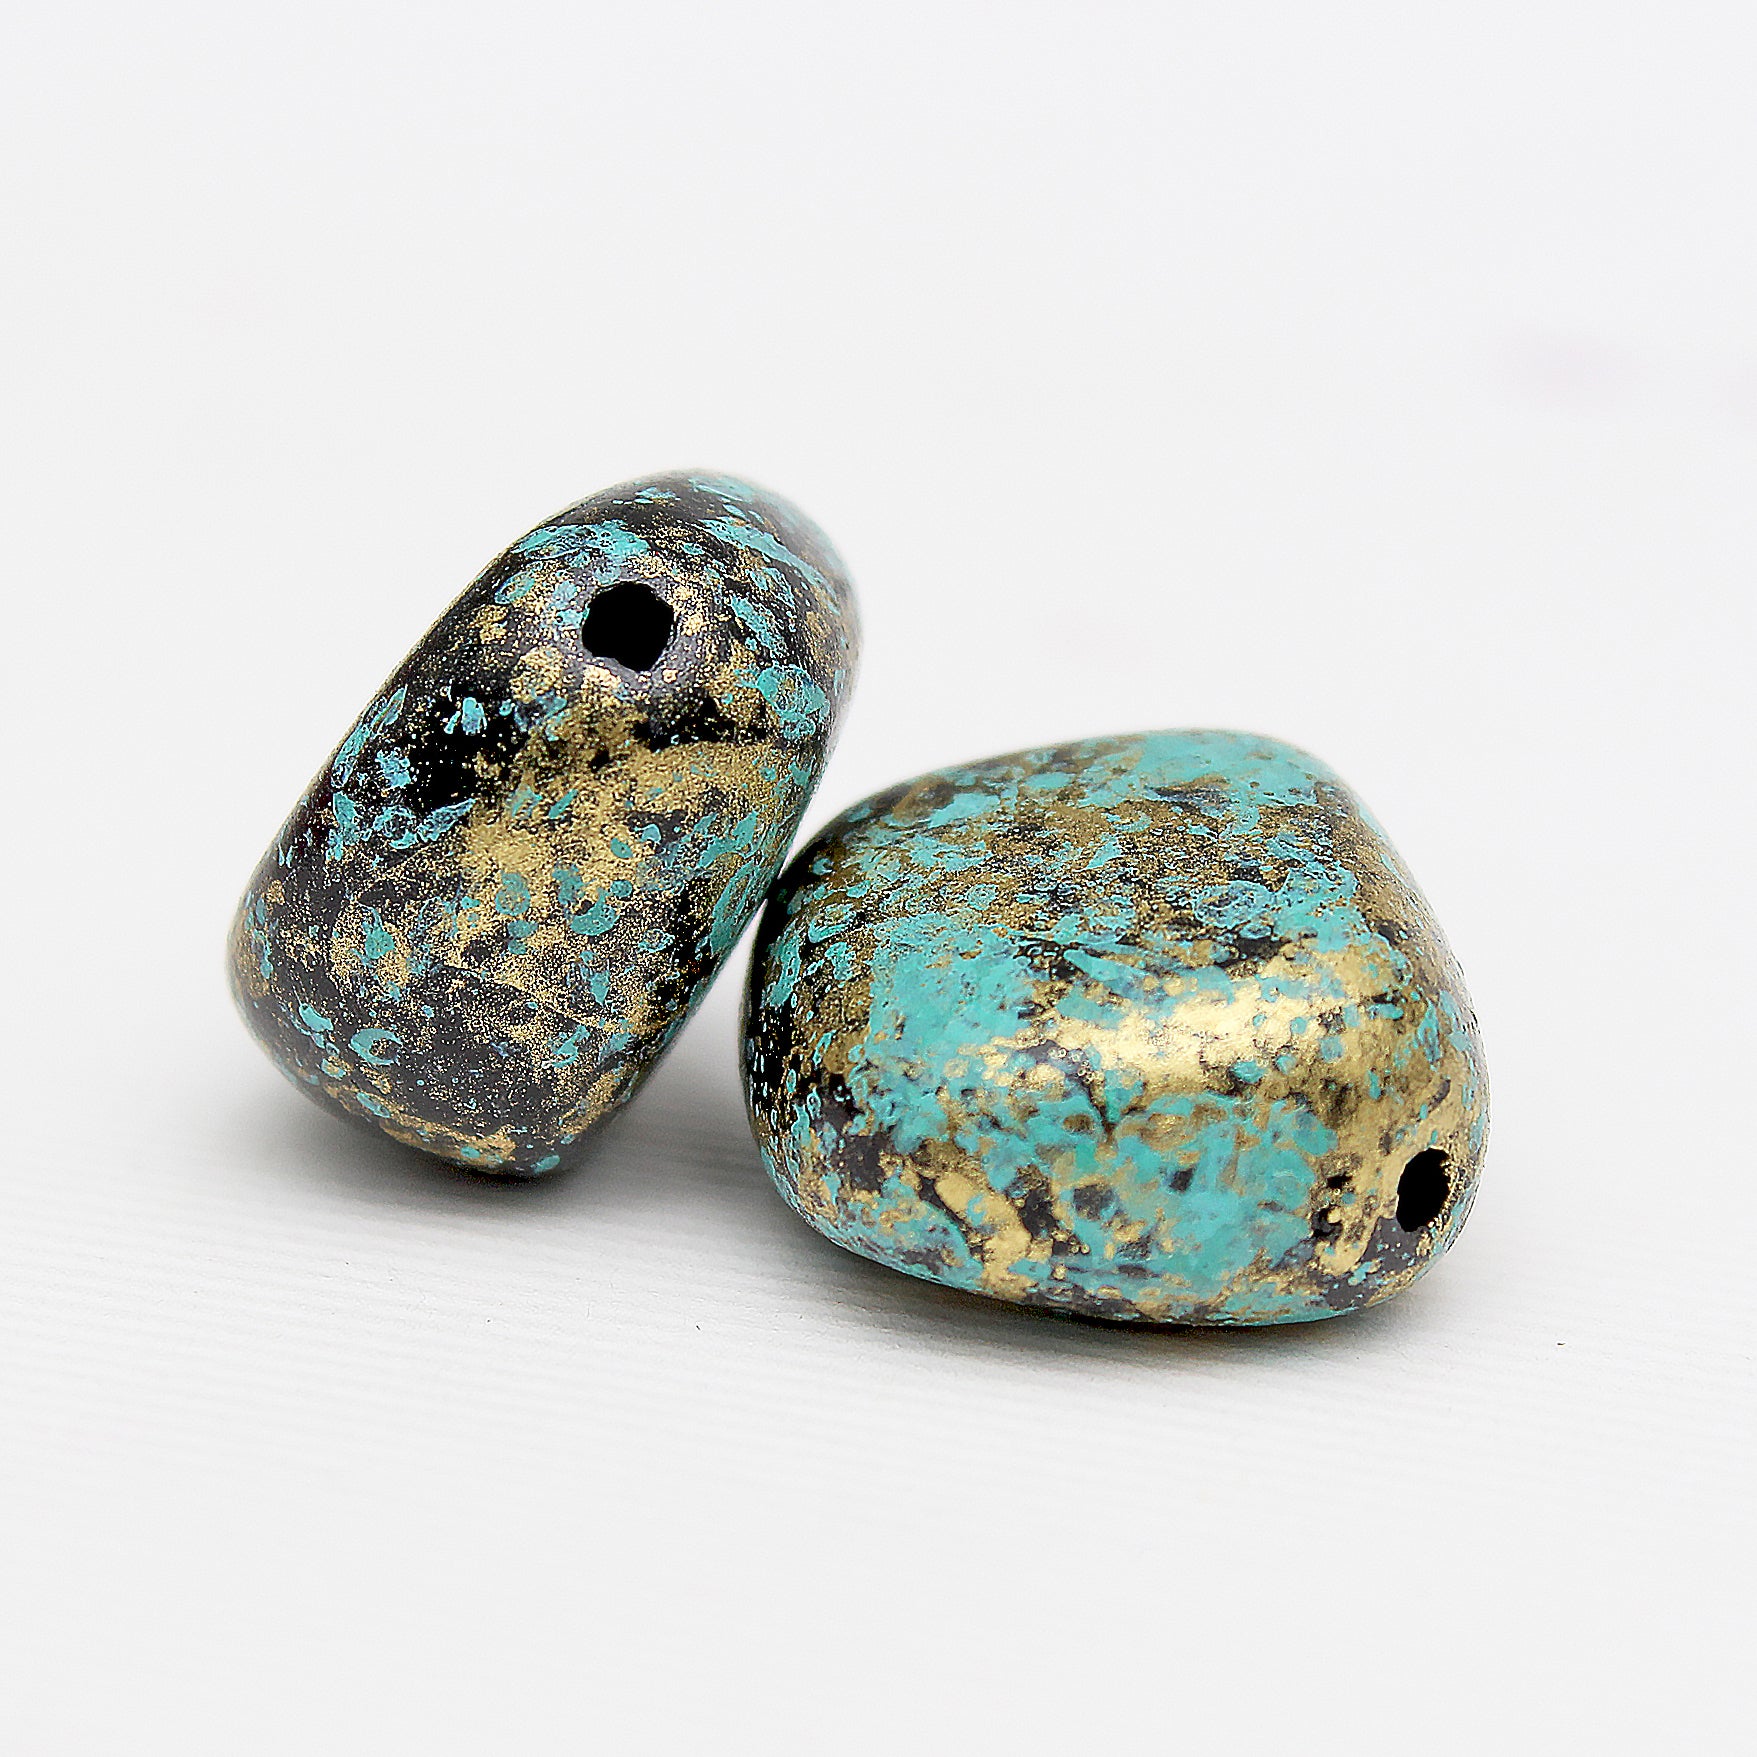 Beads Turquoise Gold Marbled 18Mm X 17Mm 30G Pb Ib